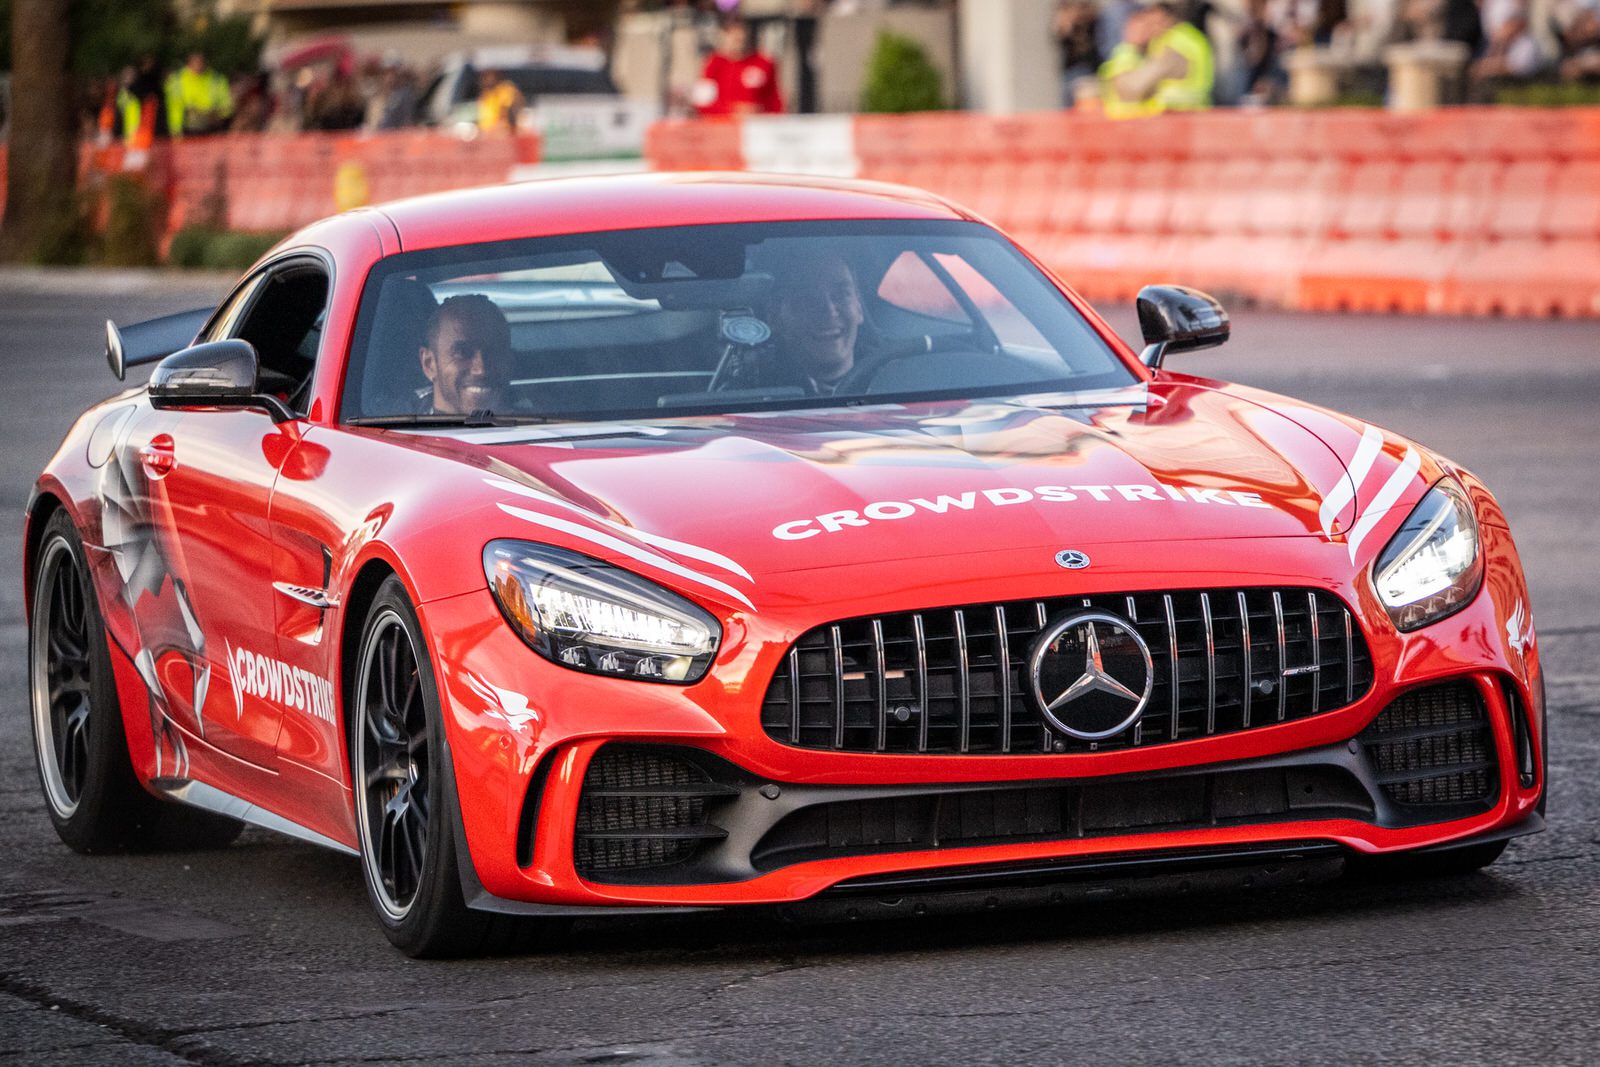 George Russell drives Lewis Hamilton in the FIA Safety Car on track during the Formula 1 Las Vegas Grand Prix 2023 launch party on November 05, 2022 on the Las Vegas Strip in Las Vegas, Nevada